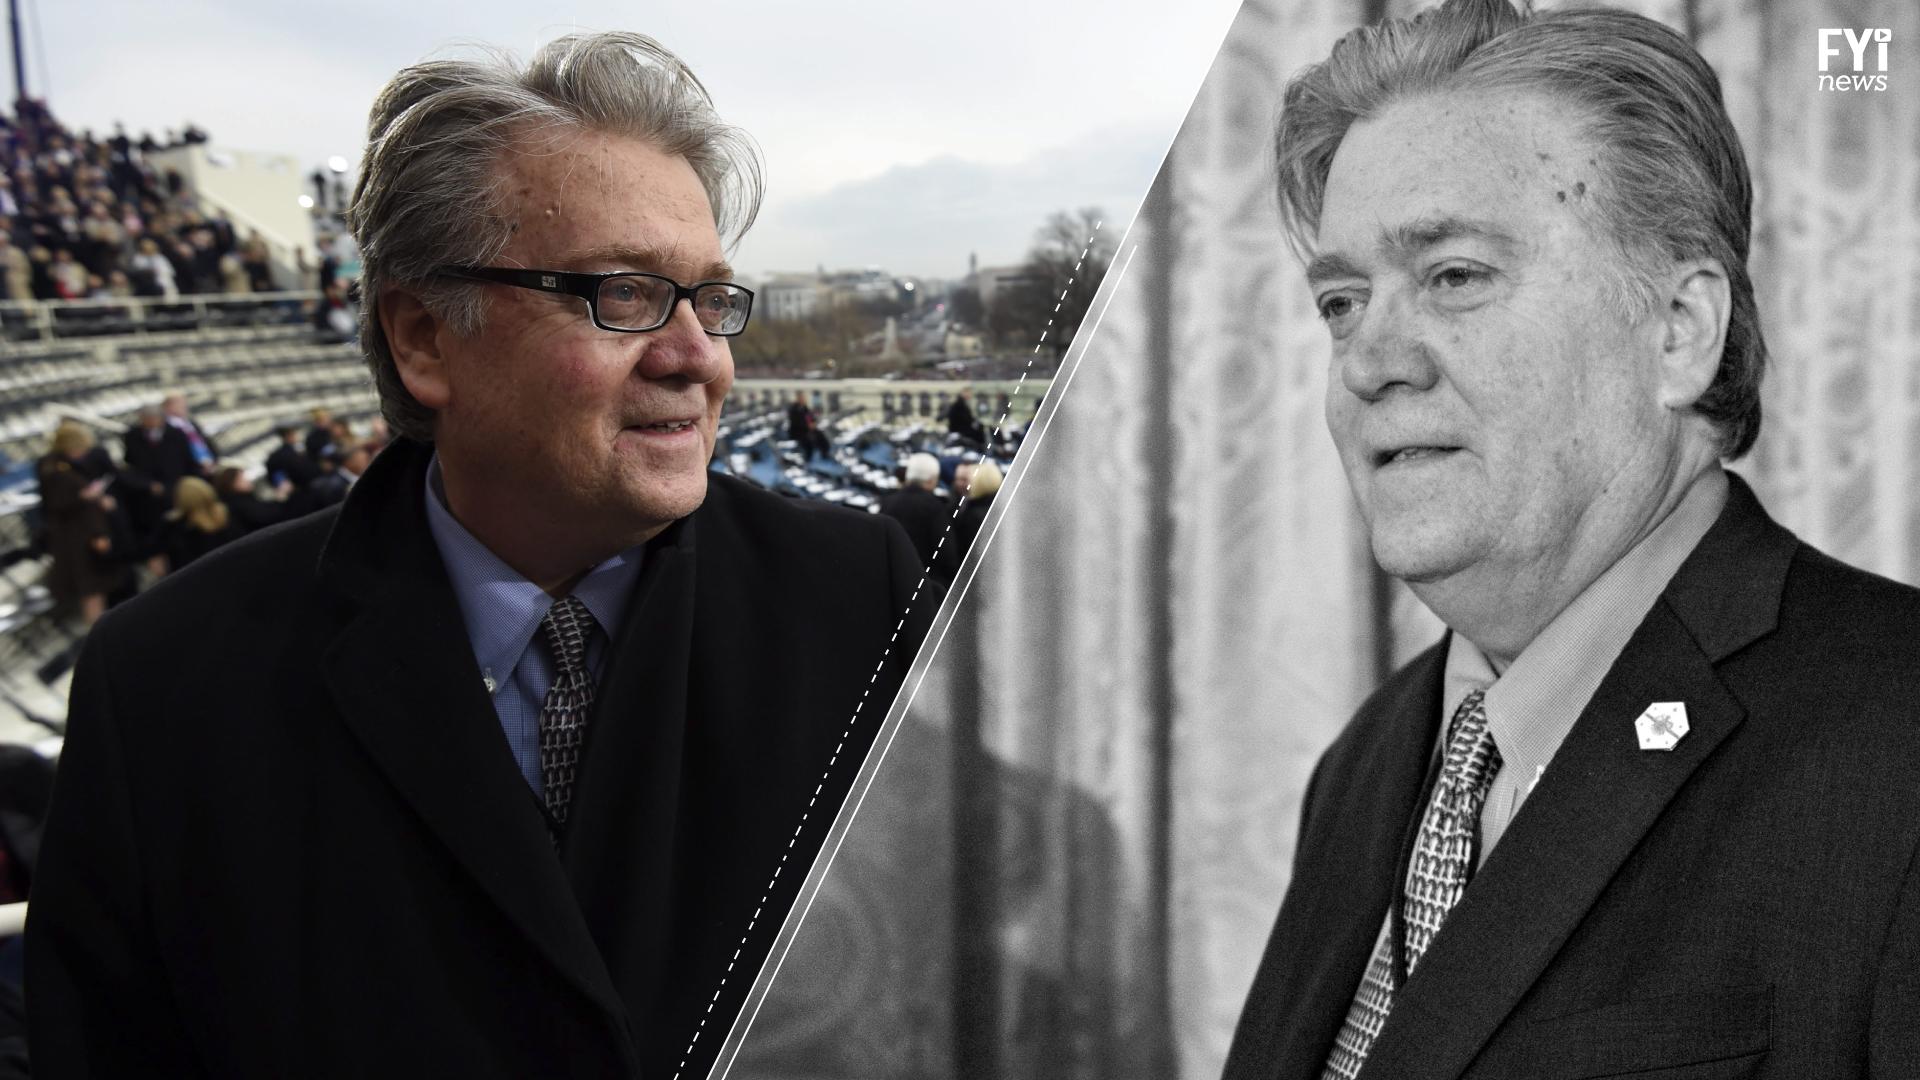 Trump's chief strategist Bannon: 'No doubt' the US will be at war with China in the next few years